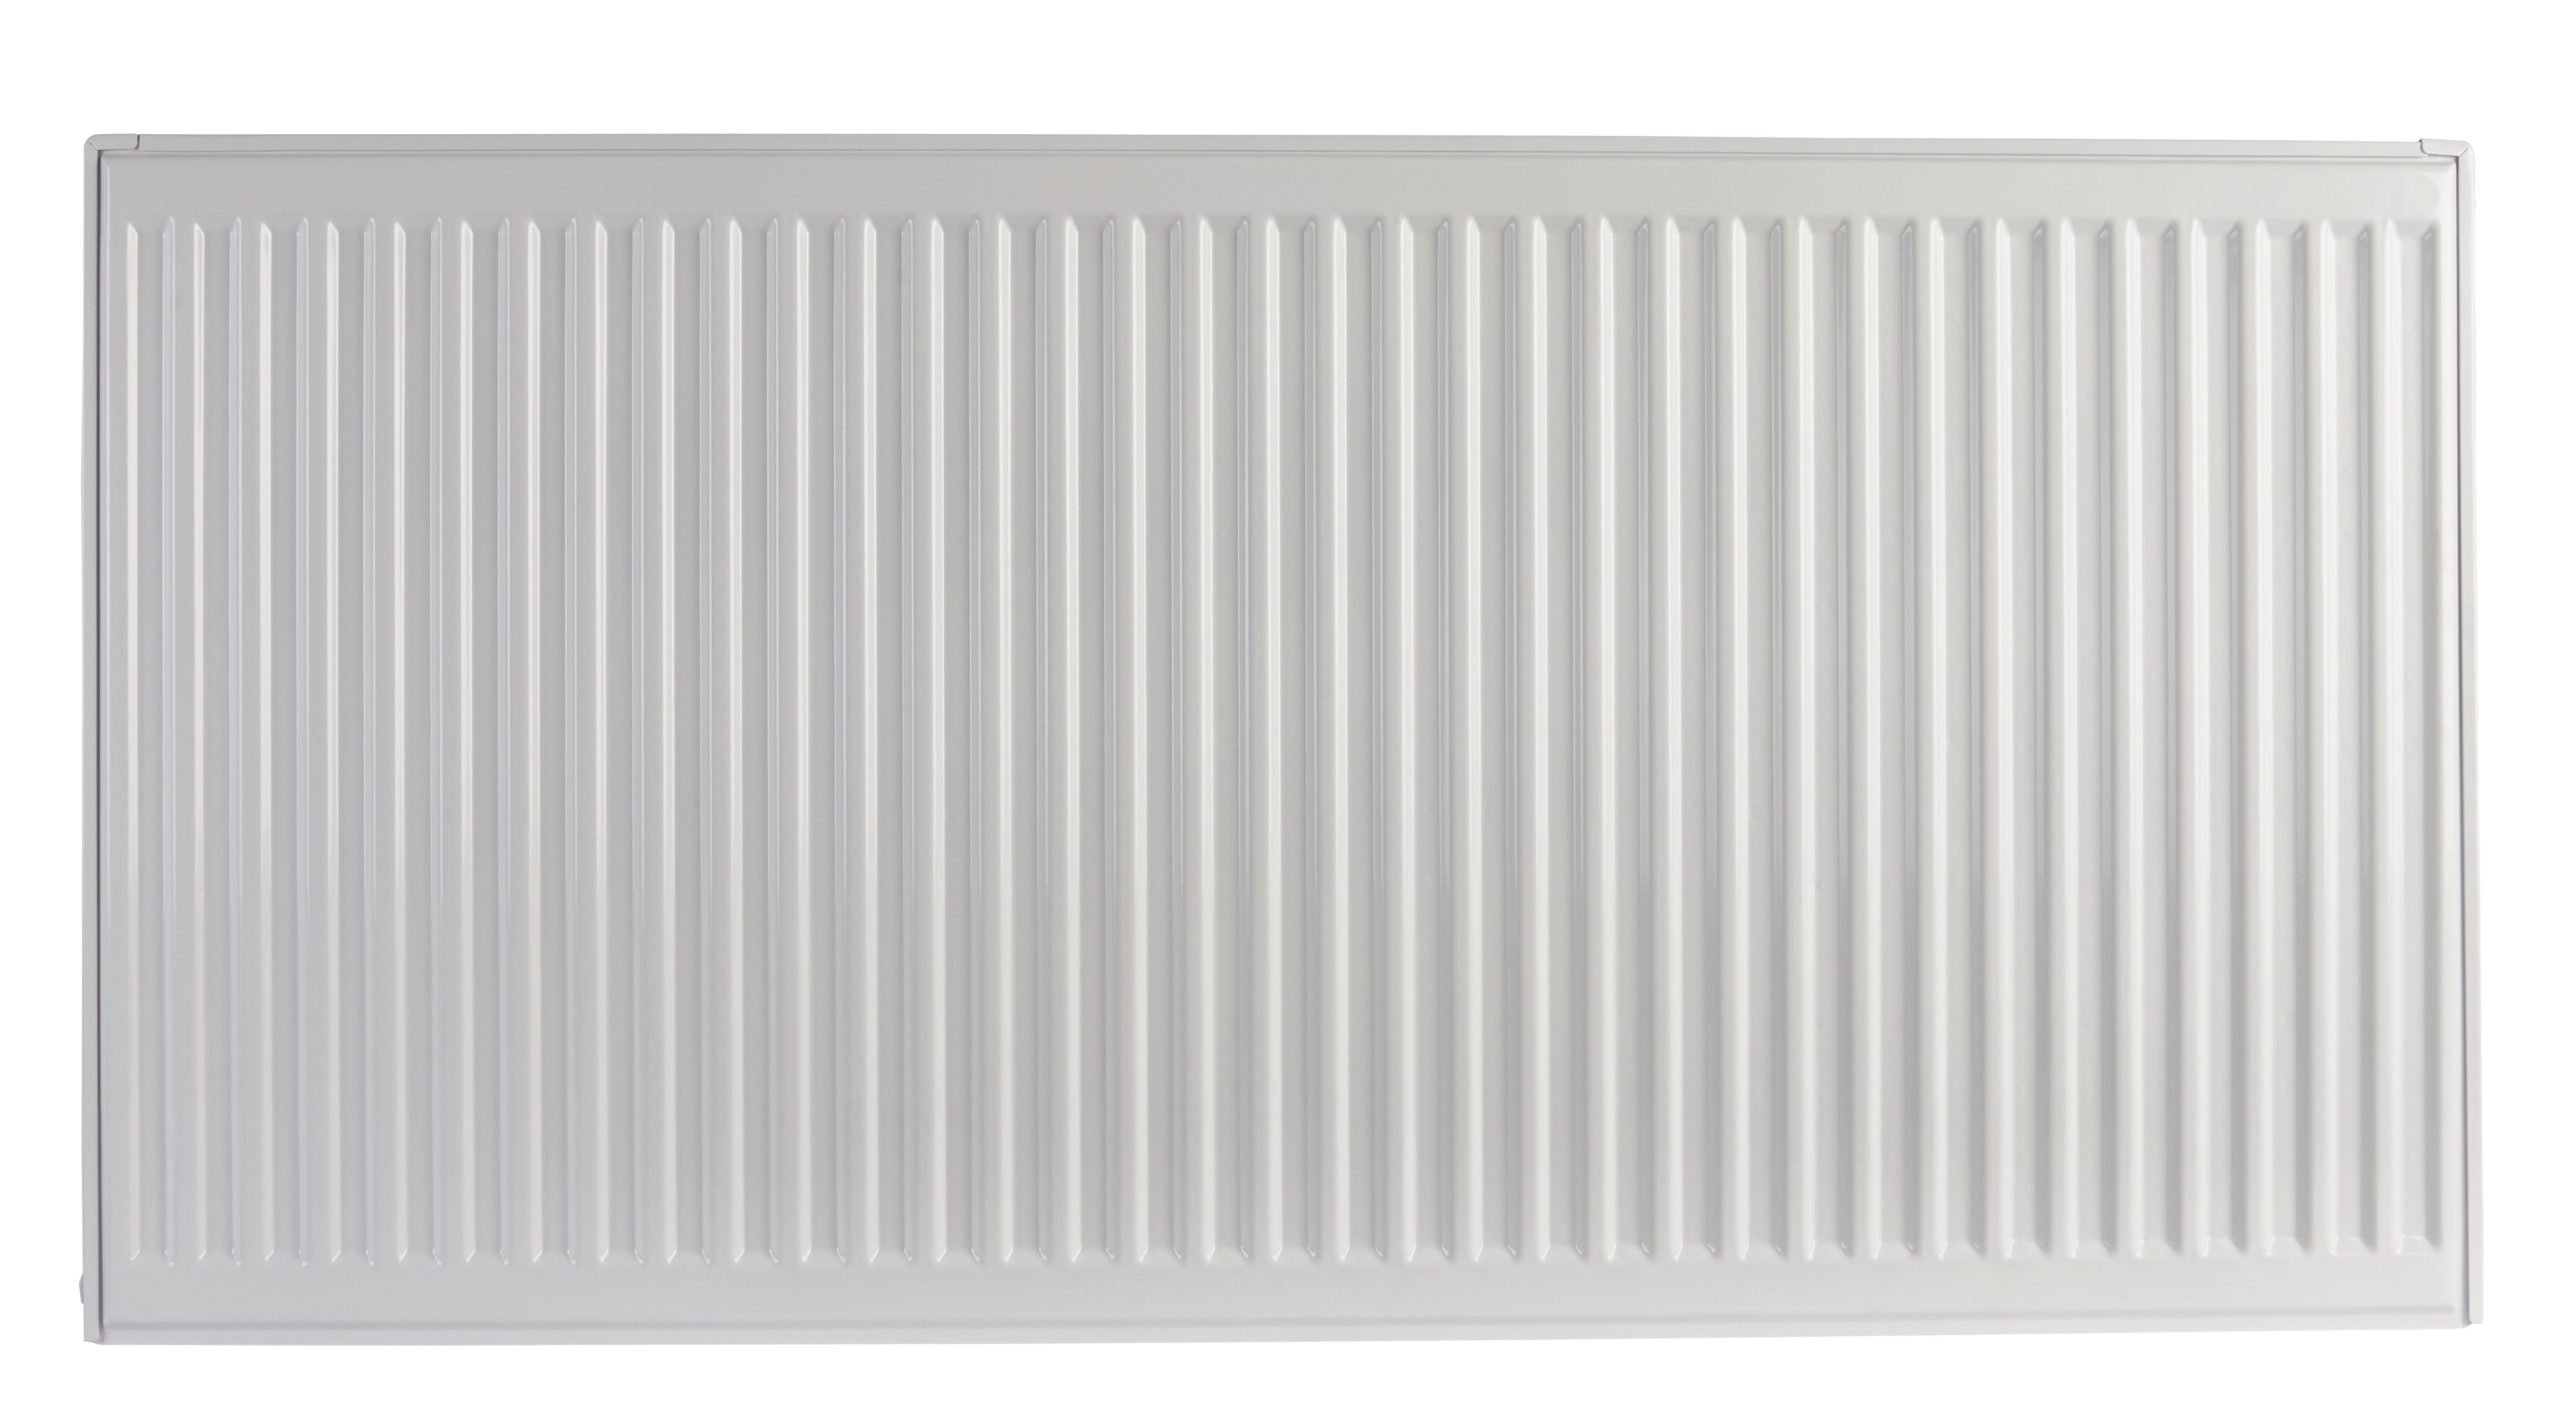 Image of Homeline by Stelrad 700 x 1200mm Type 21 Double Panel Plus Single Convector Radiator